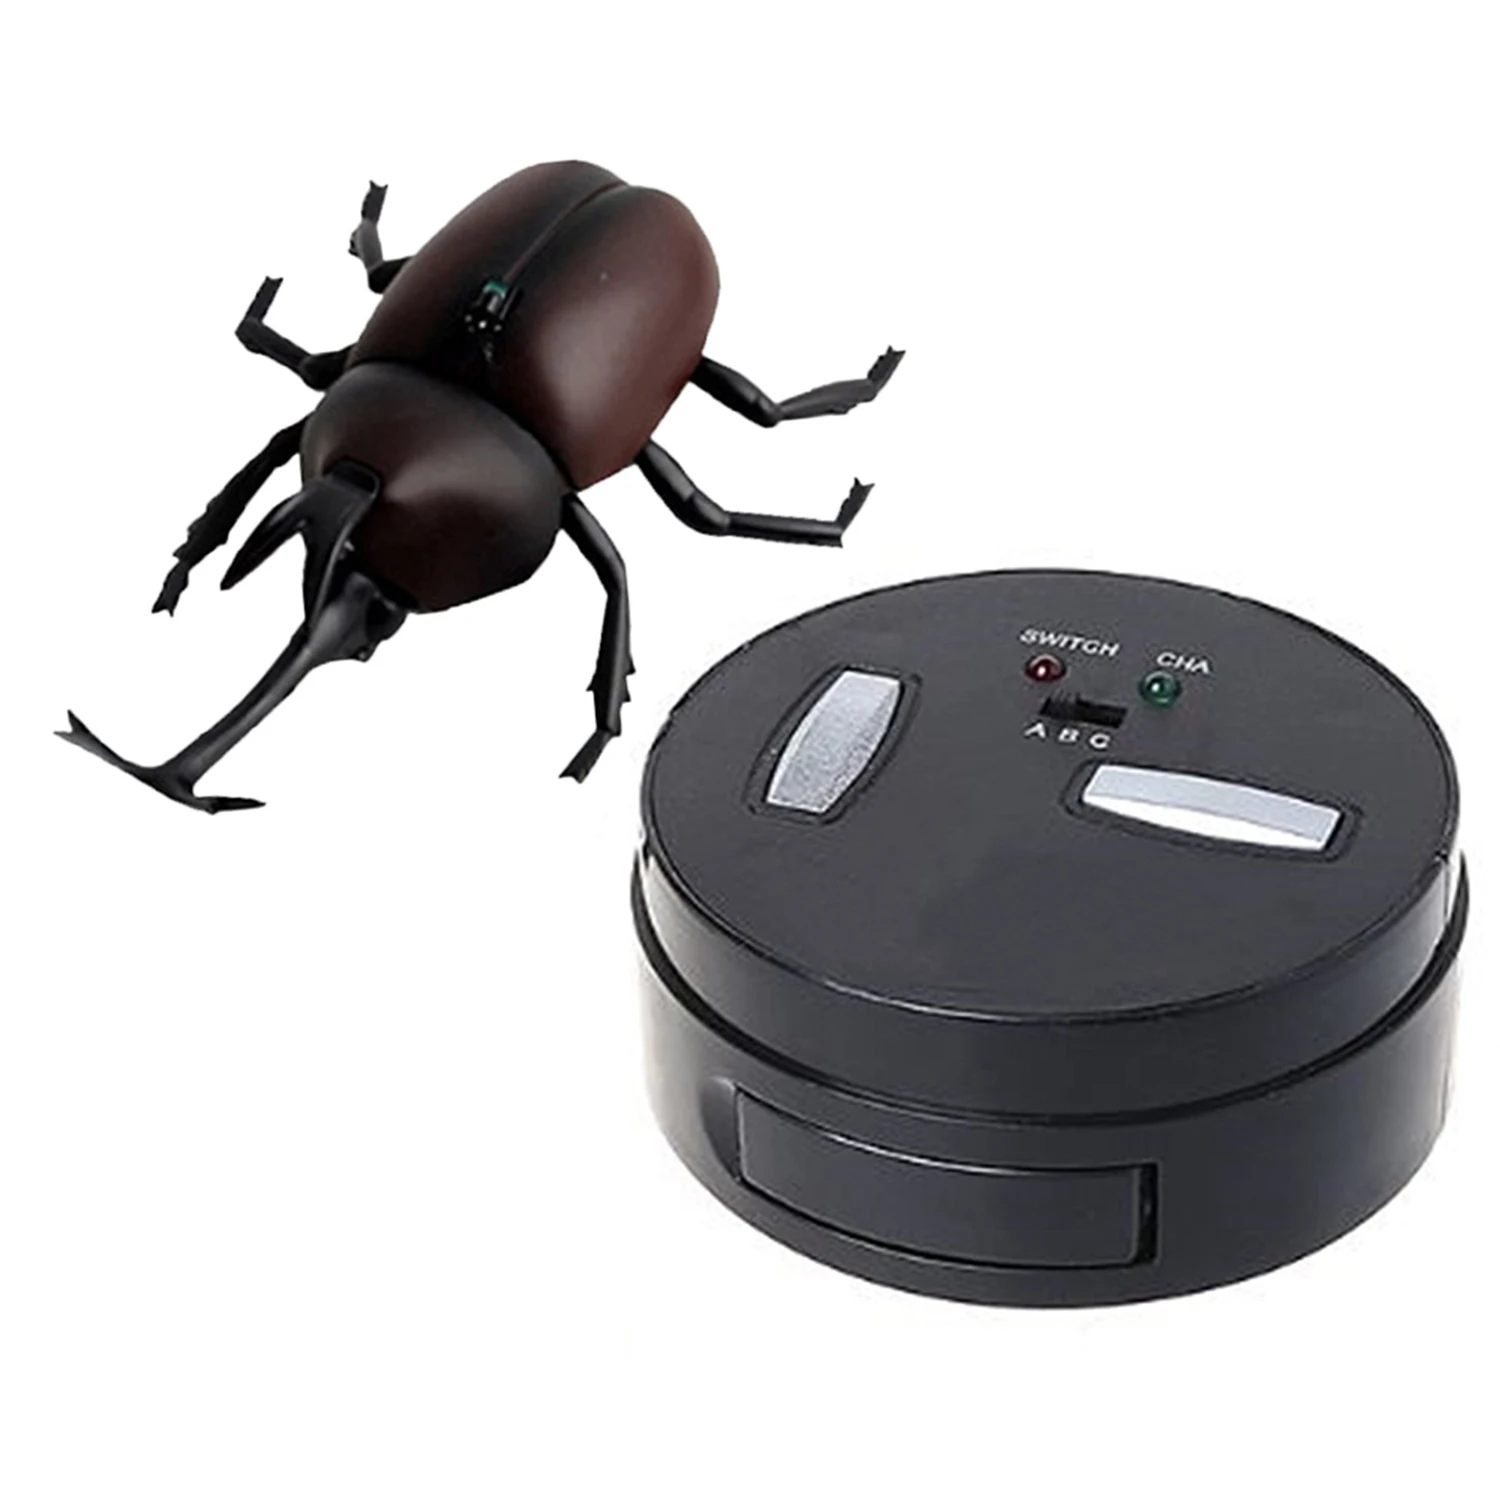 

Infrared Remote Control Simulation Beetle Mini Rc Animal Kids Child Toy Boy Gift